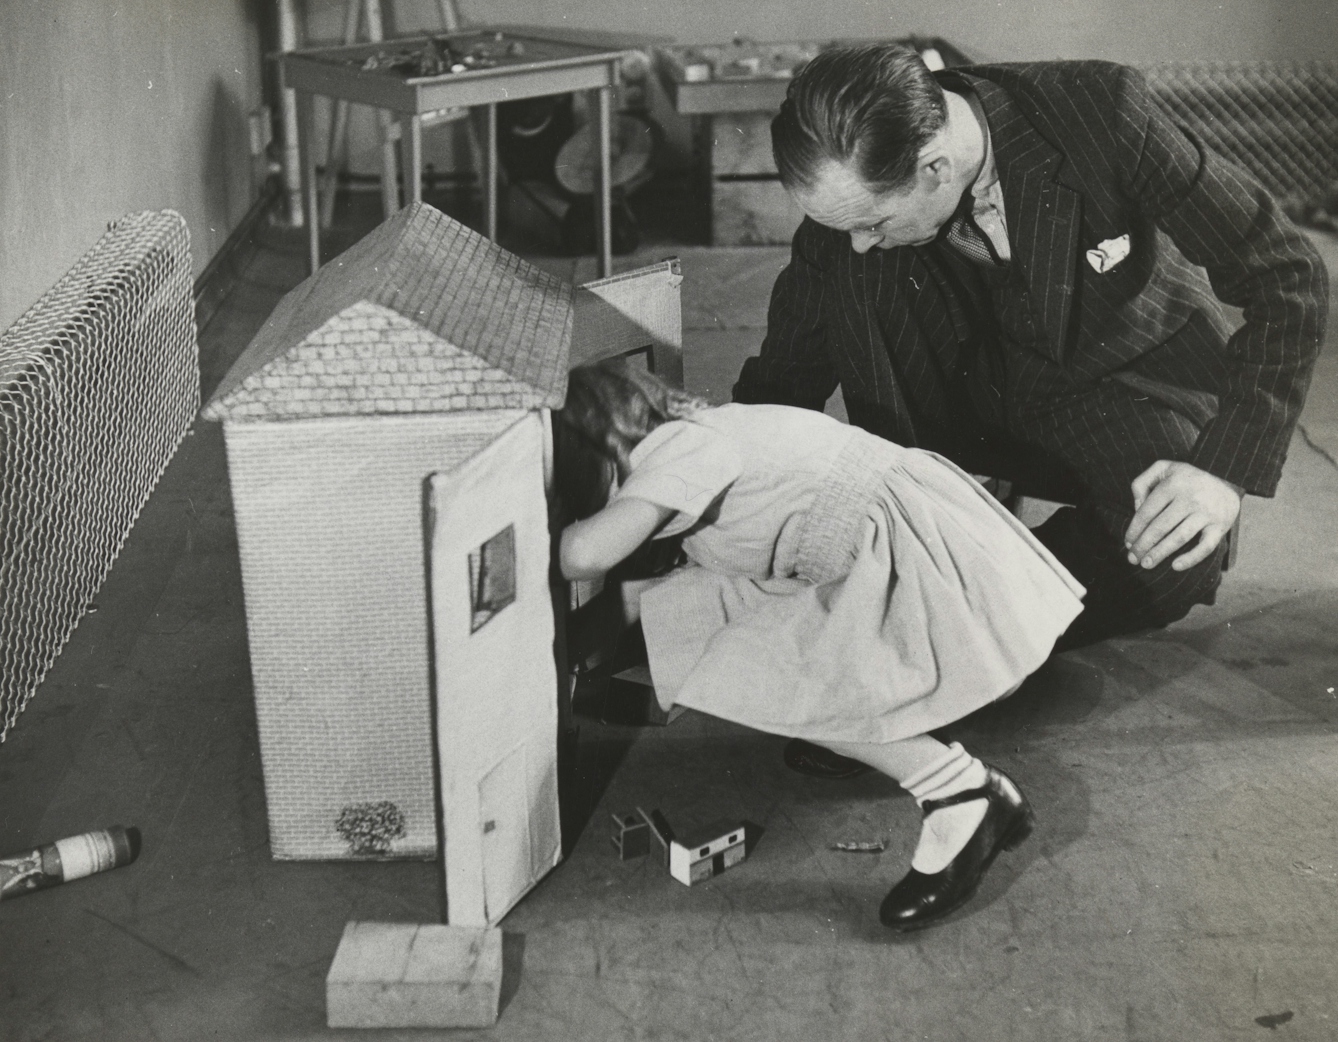 A man looks into a doll's house with small child.